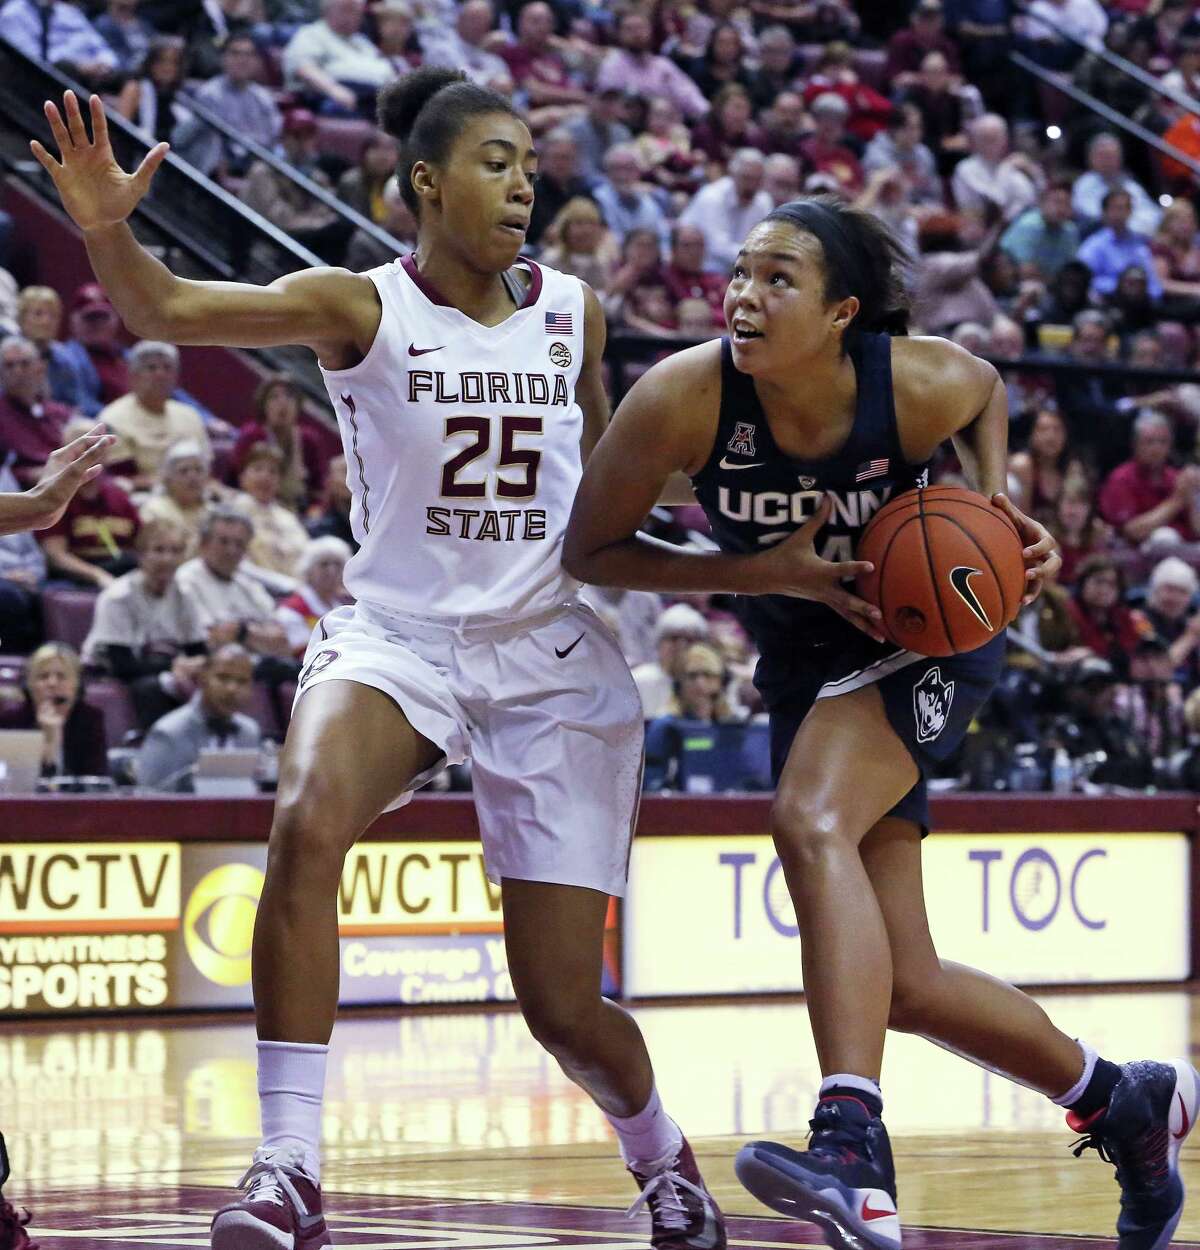 UConn’s Napheesa Collier drives to the basket against Florida State earlier this season.